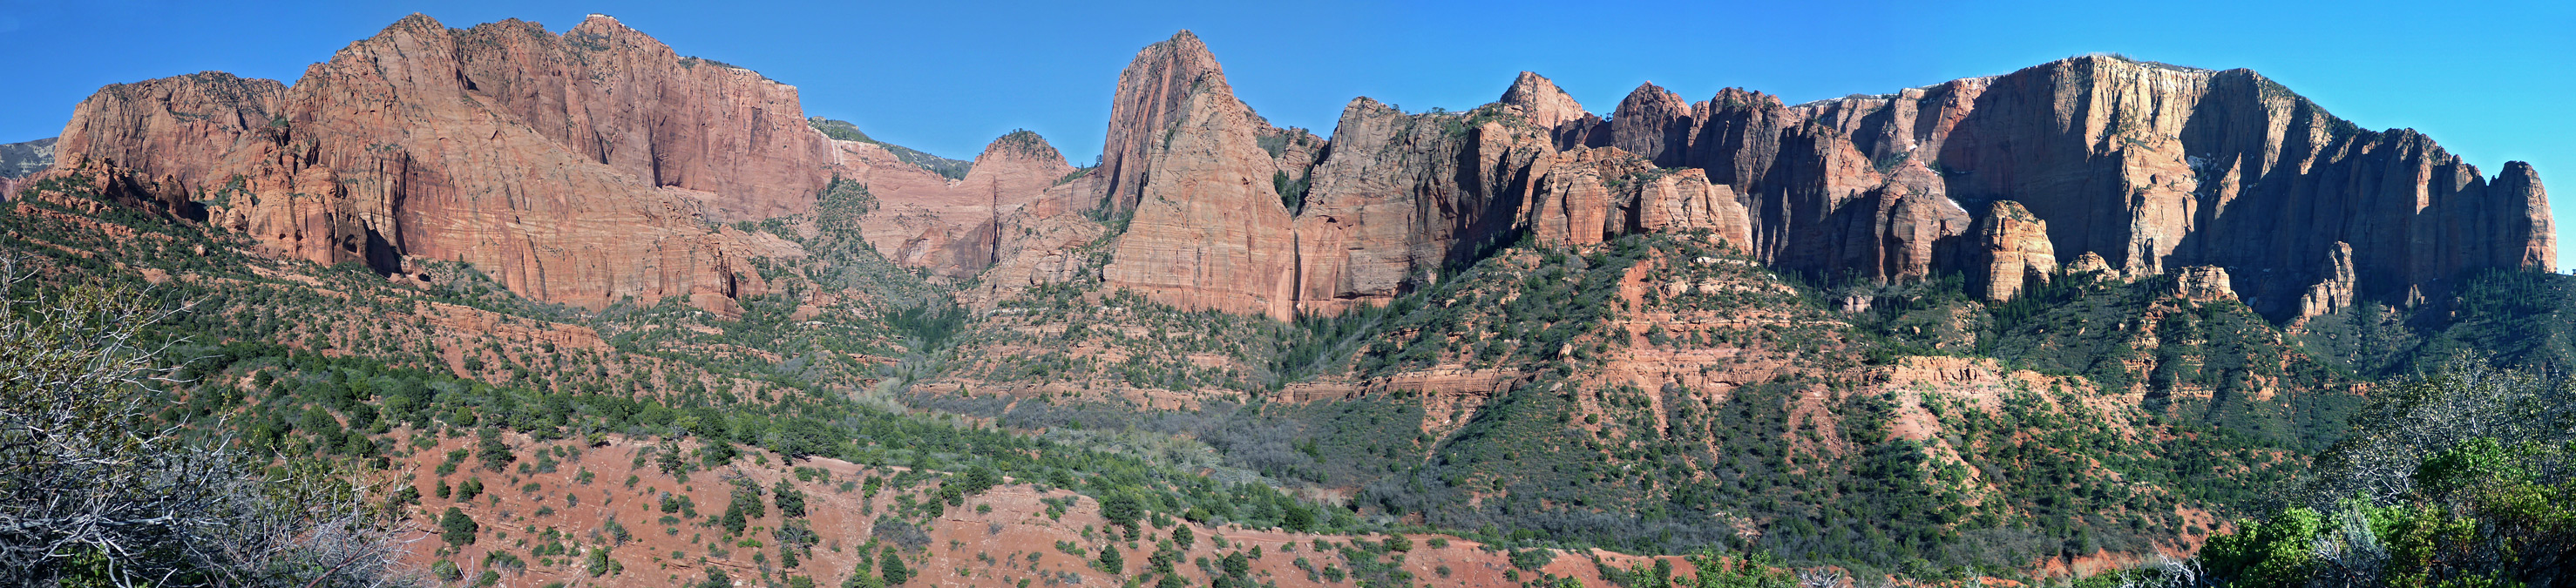 Cliffs and canyons above Timber Creek